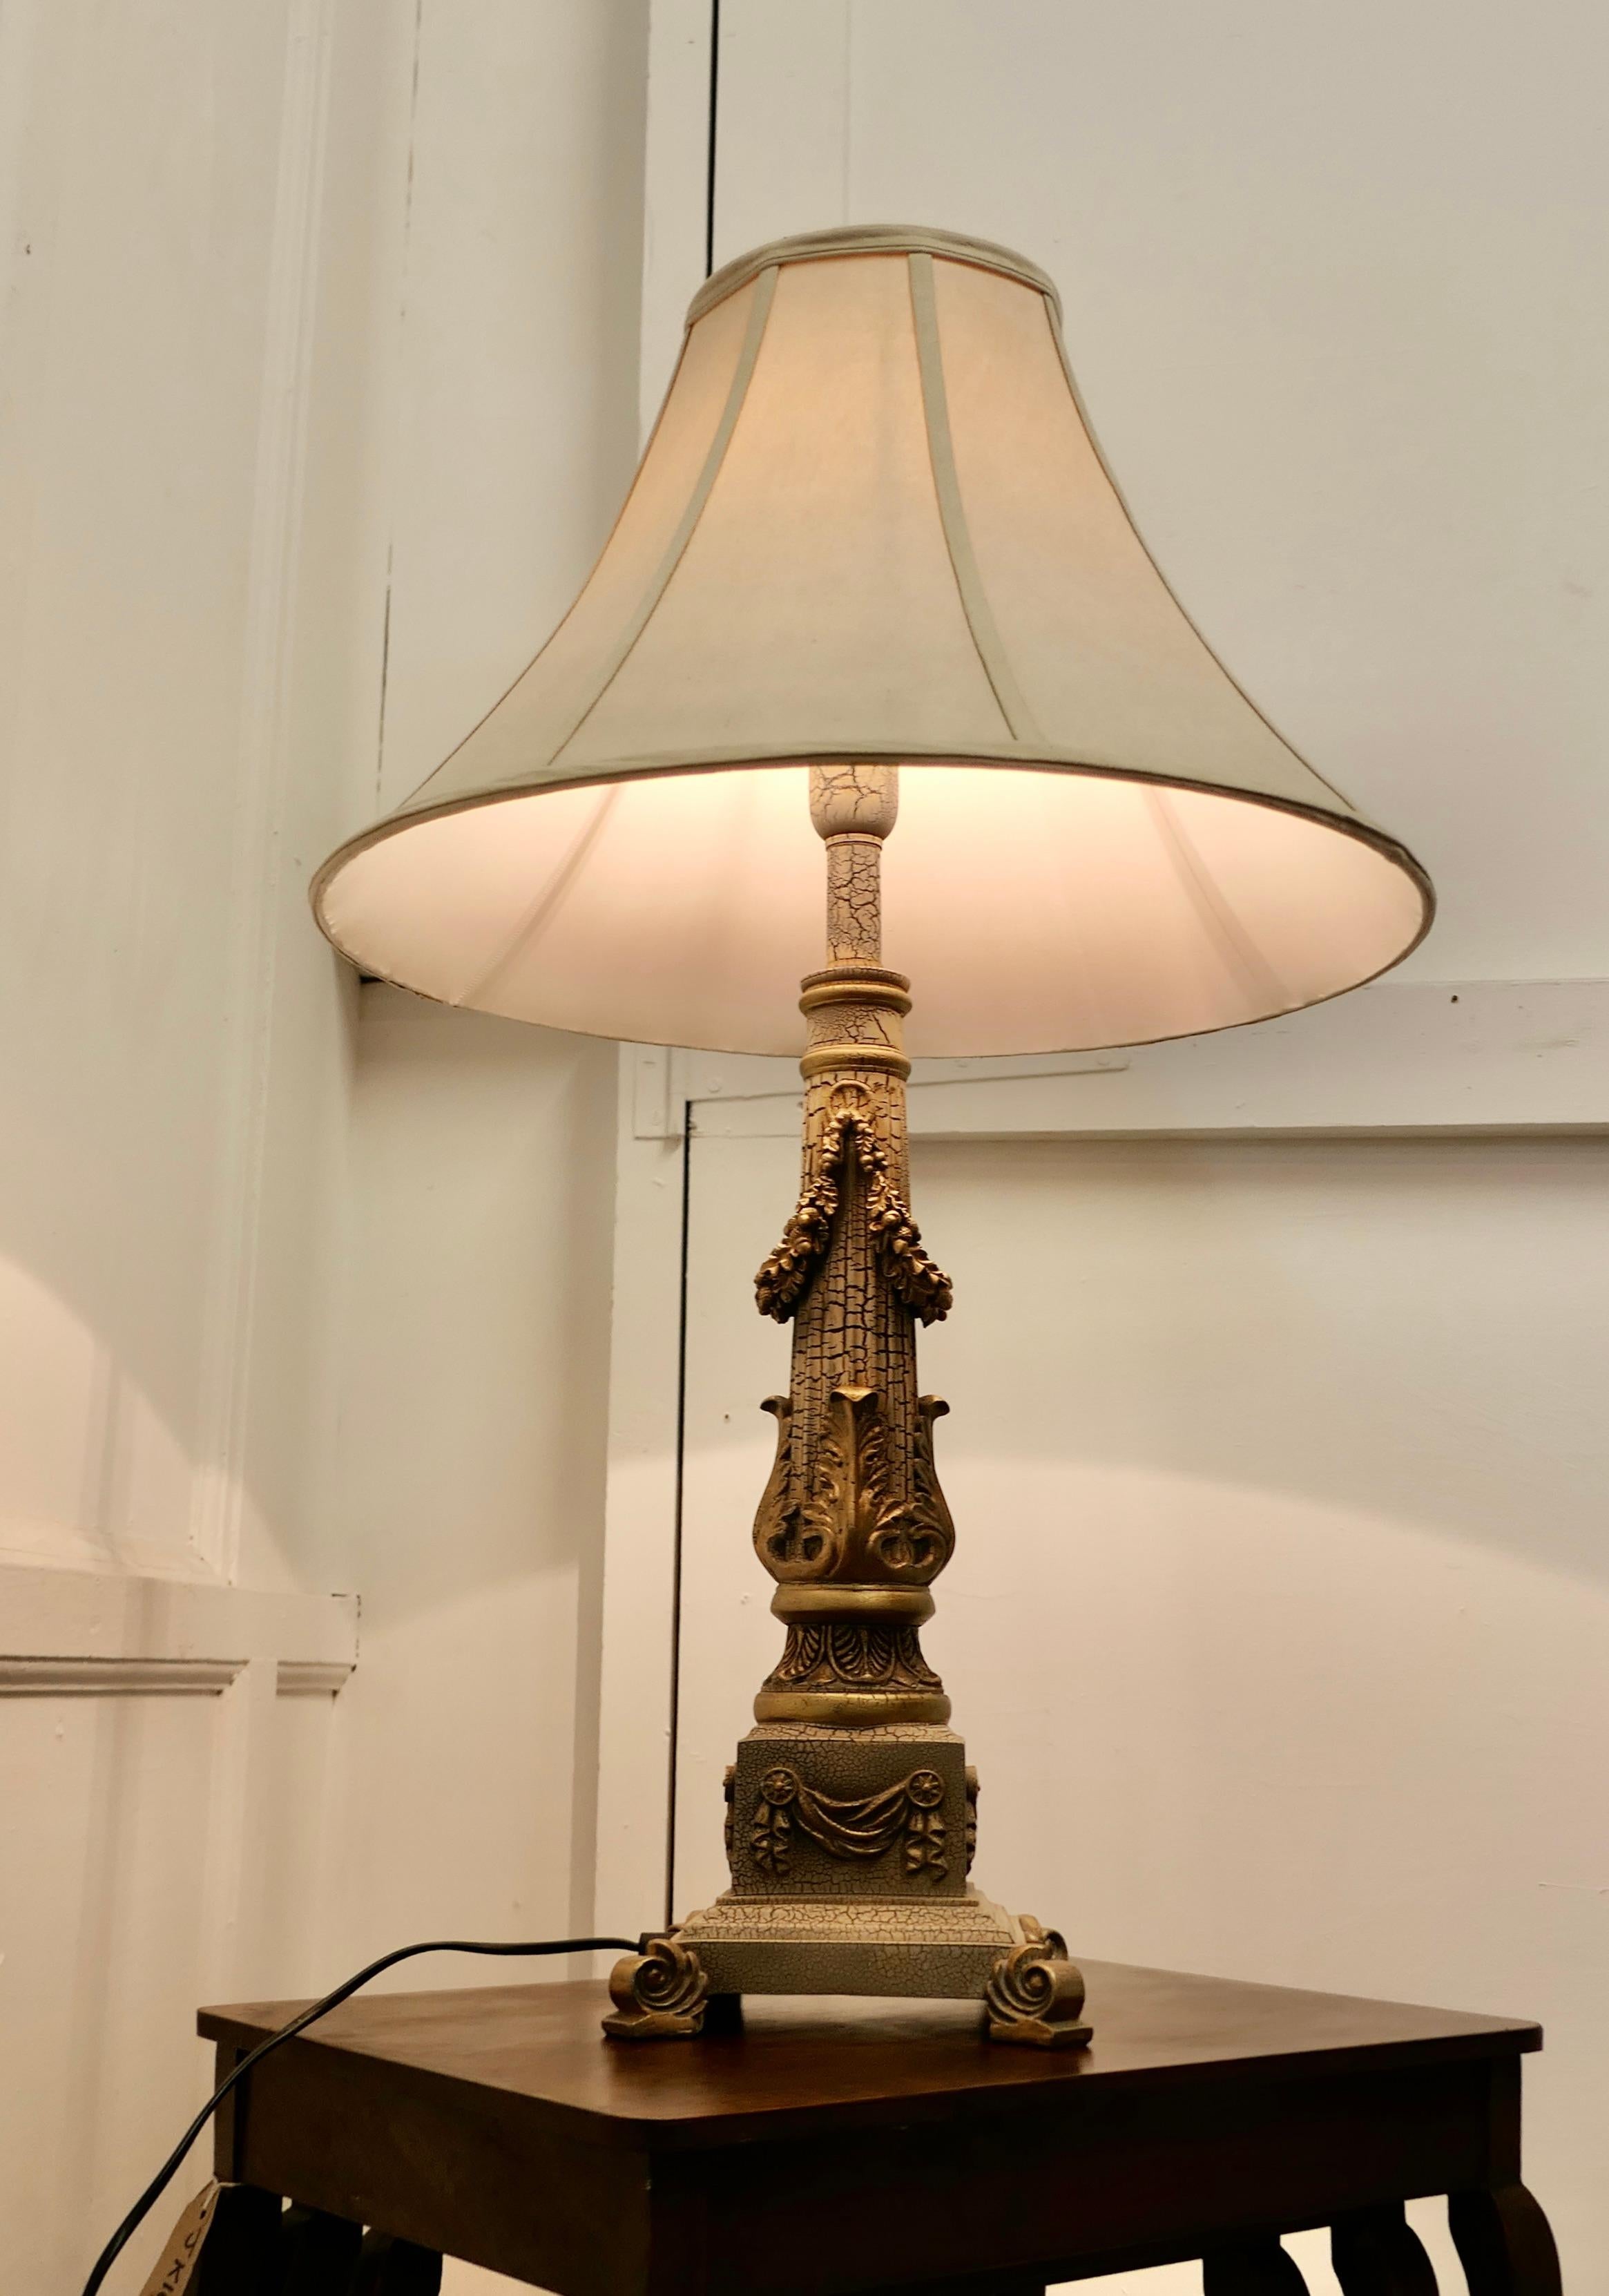 Corinthian column table lamp

This is a very attractive piece the column is decorated with swags and acanthus leaves and is set on a stepped and scroll footed base, the lamp has a crackle patinated finish which resembles old brass
This is a very